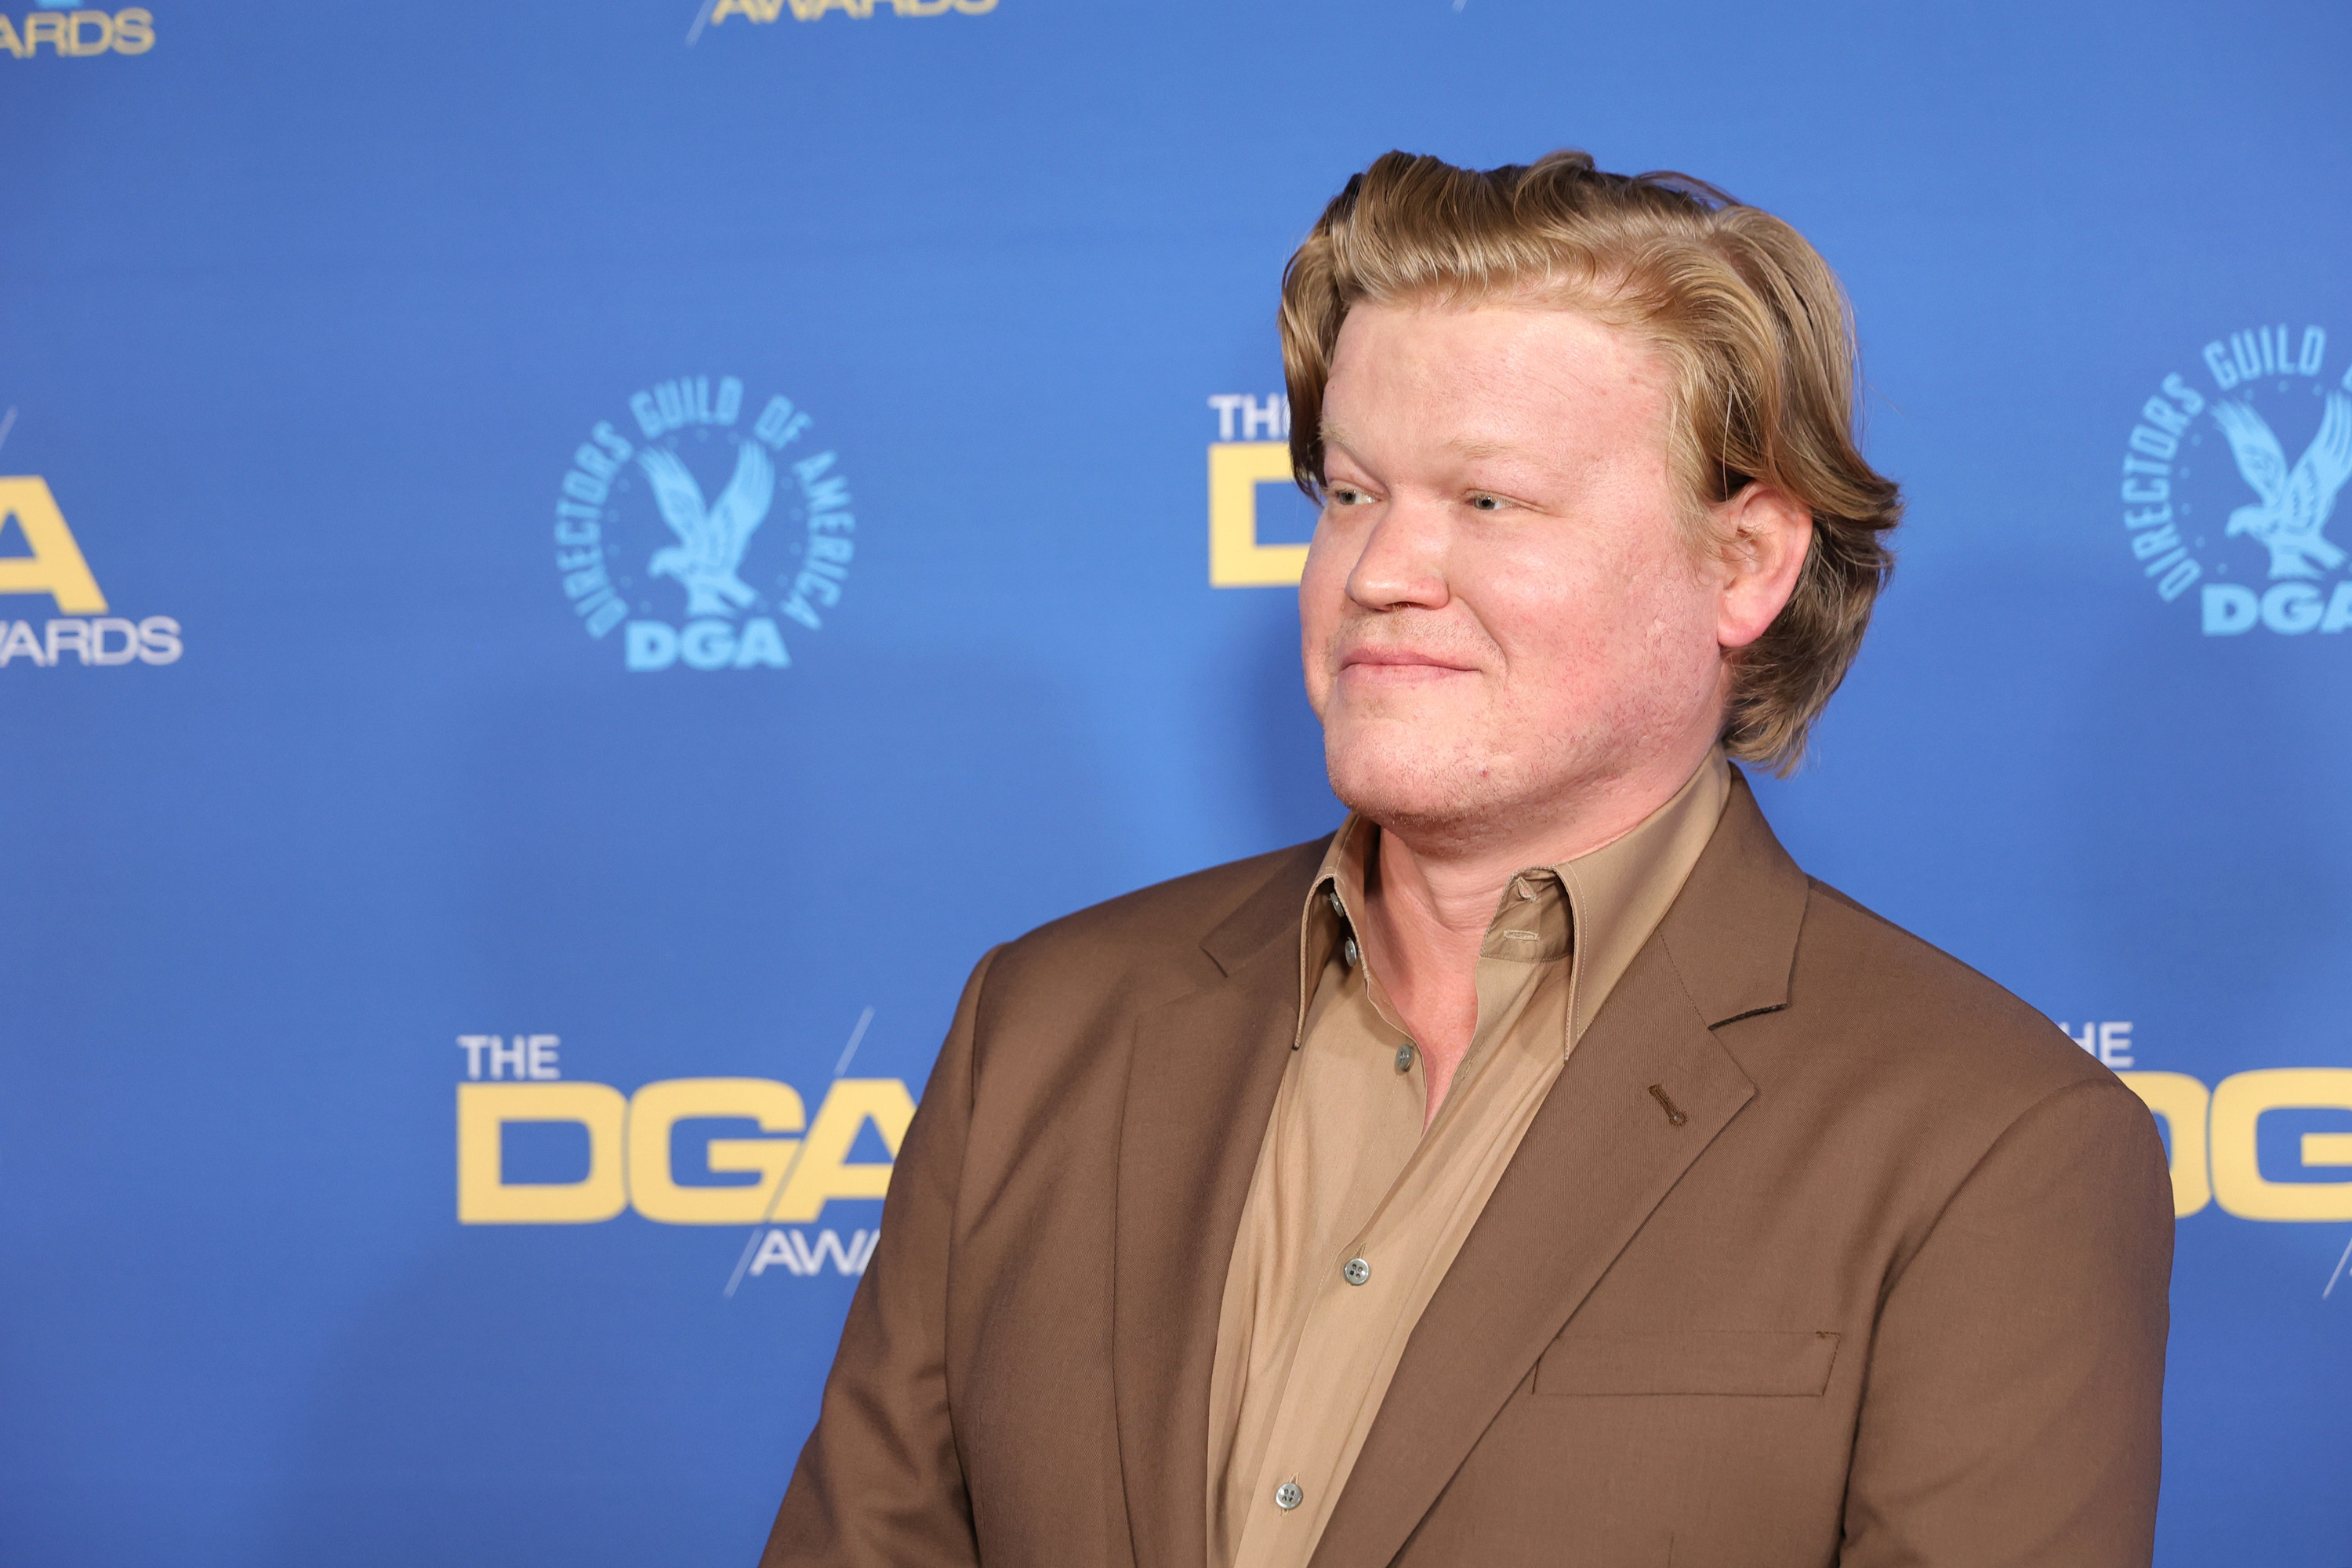 Jesse Plemons in a suit smiling at something off camera